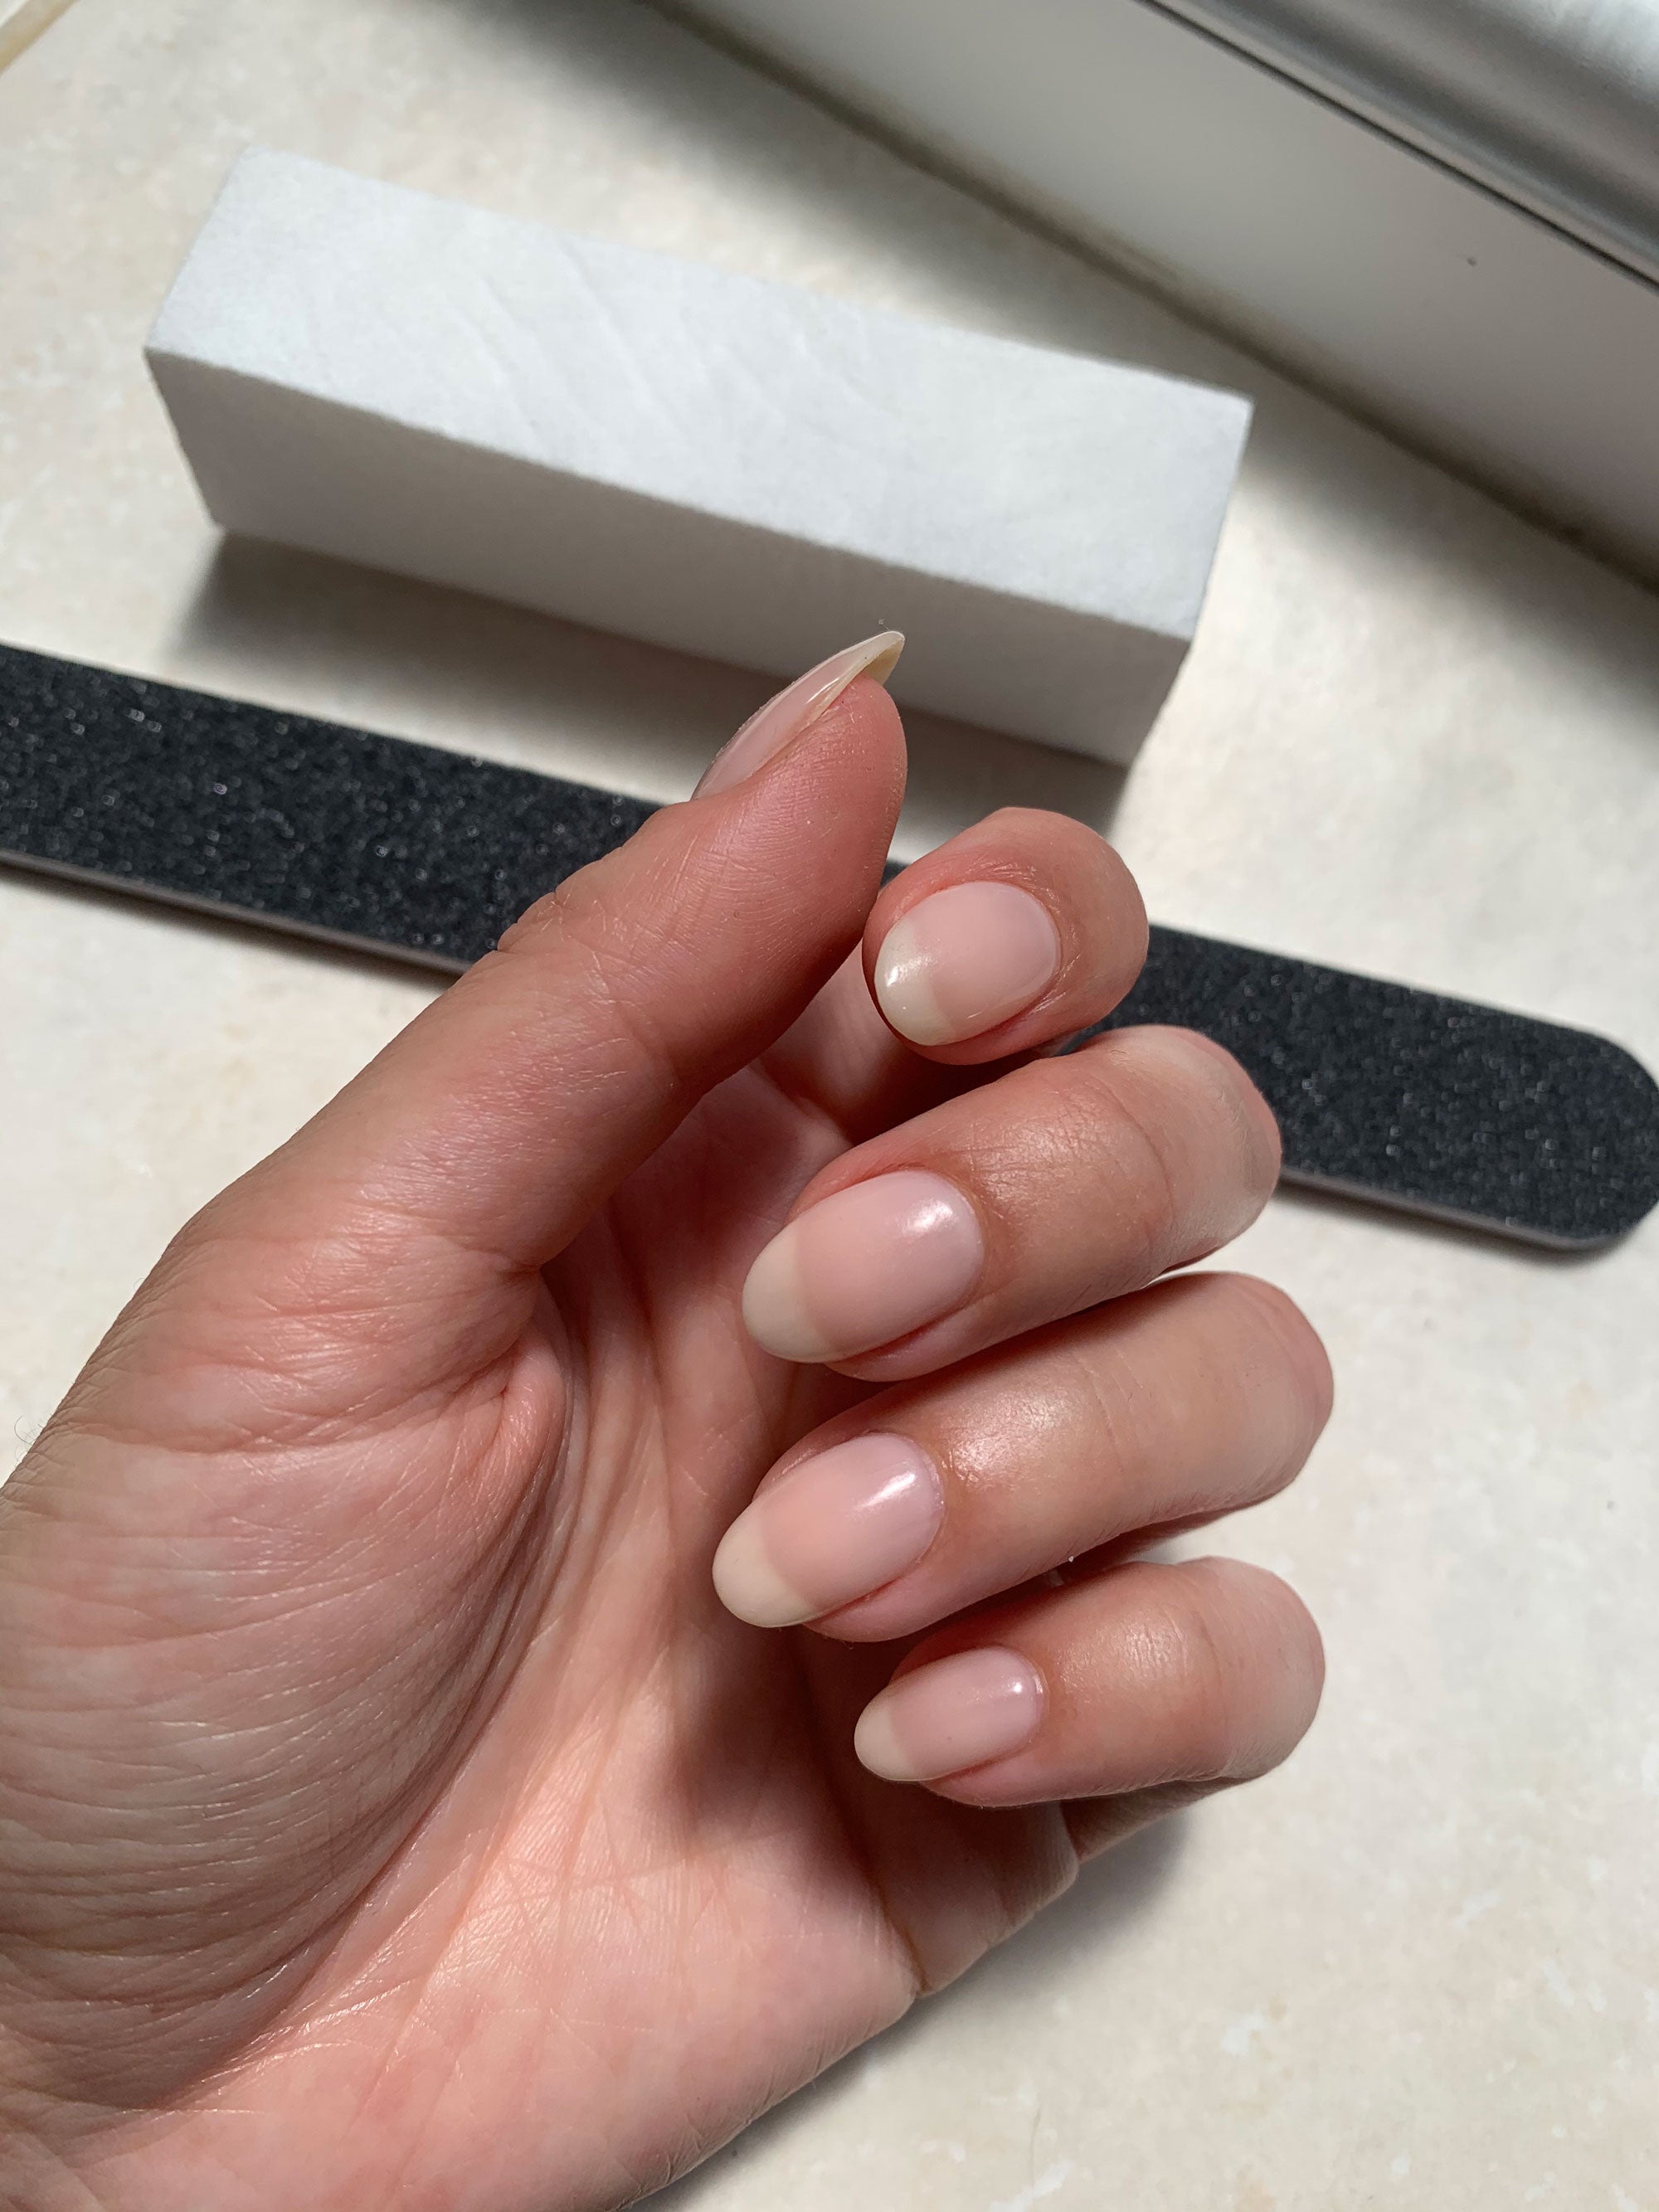 How to Repair Your Nails After Shellac or Polish